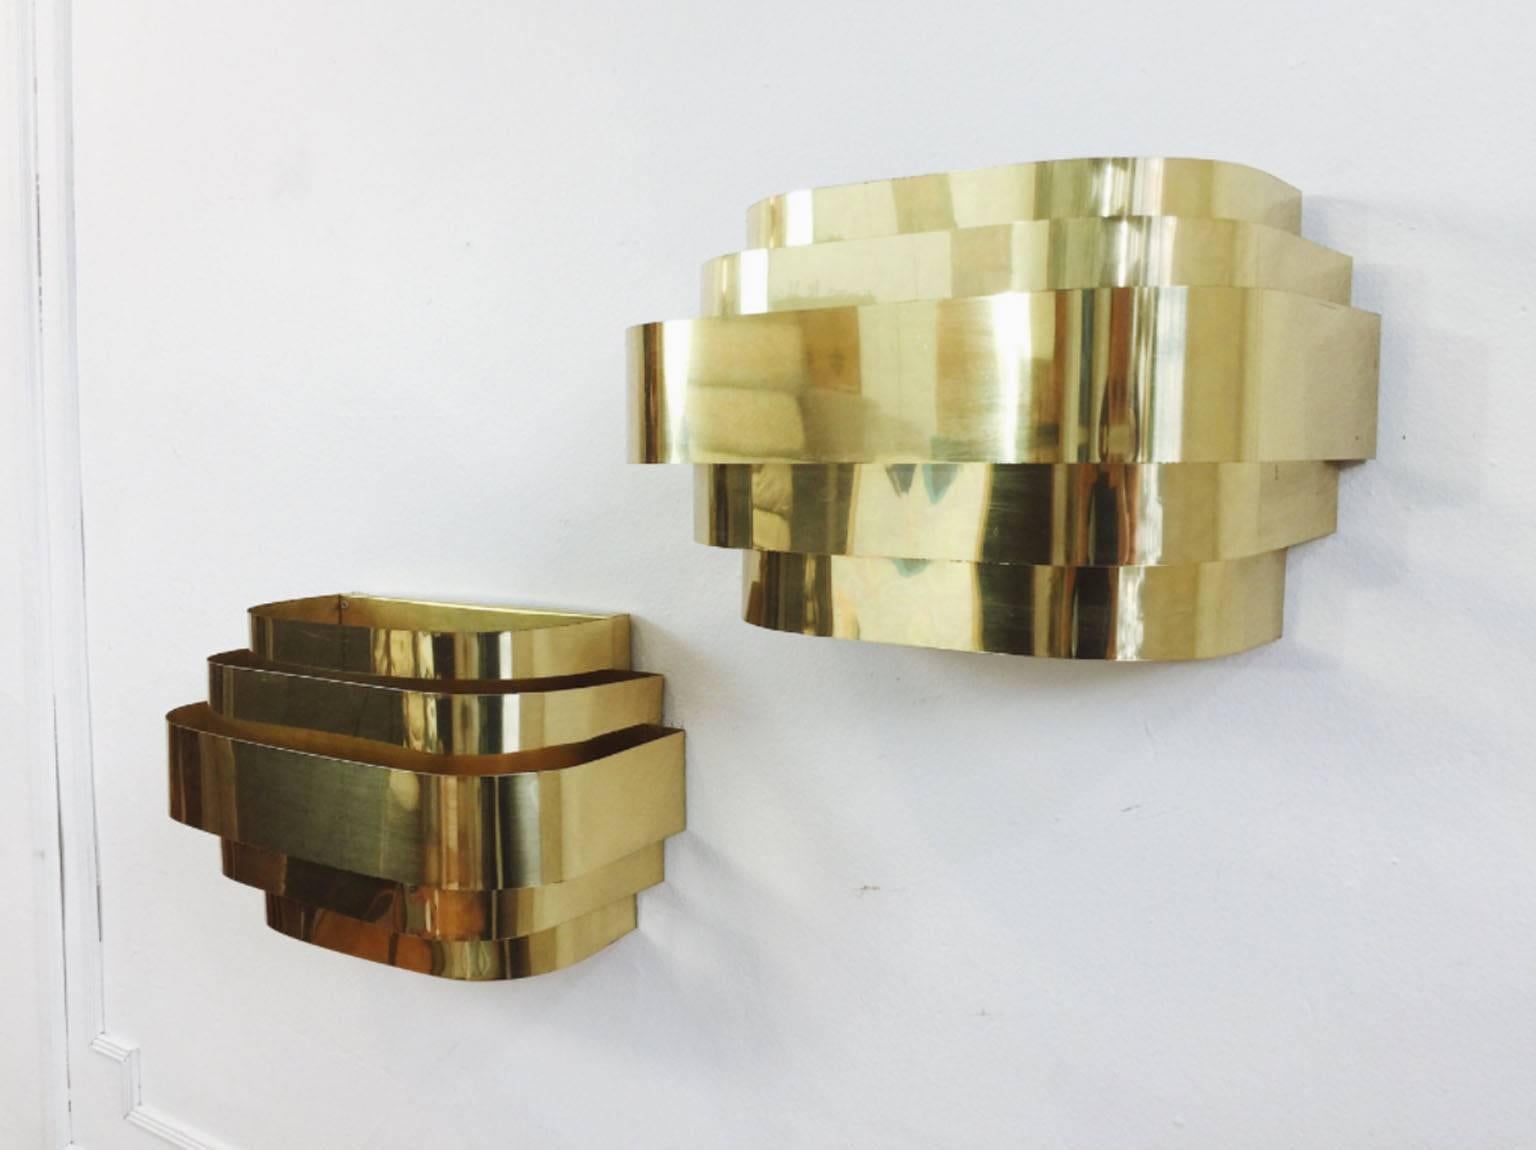 Pair of Lightolier style, Mid-Century Modern, brass-plated cascade wall sconces. Art Deco or Hollywood Regency style. Both pieces are in excellent vintage condition with light staining on inside surfaces.

Wiring and light bulb sockets are not